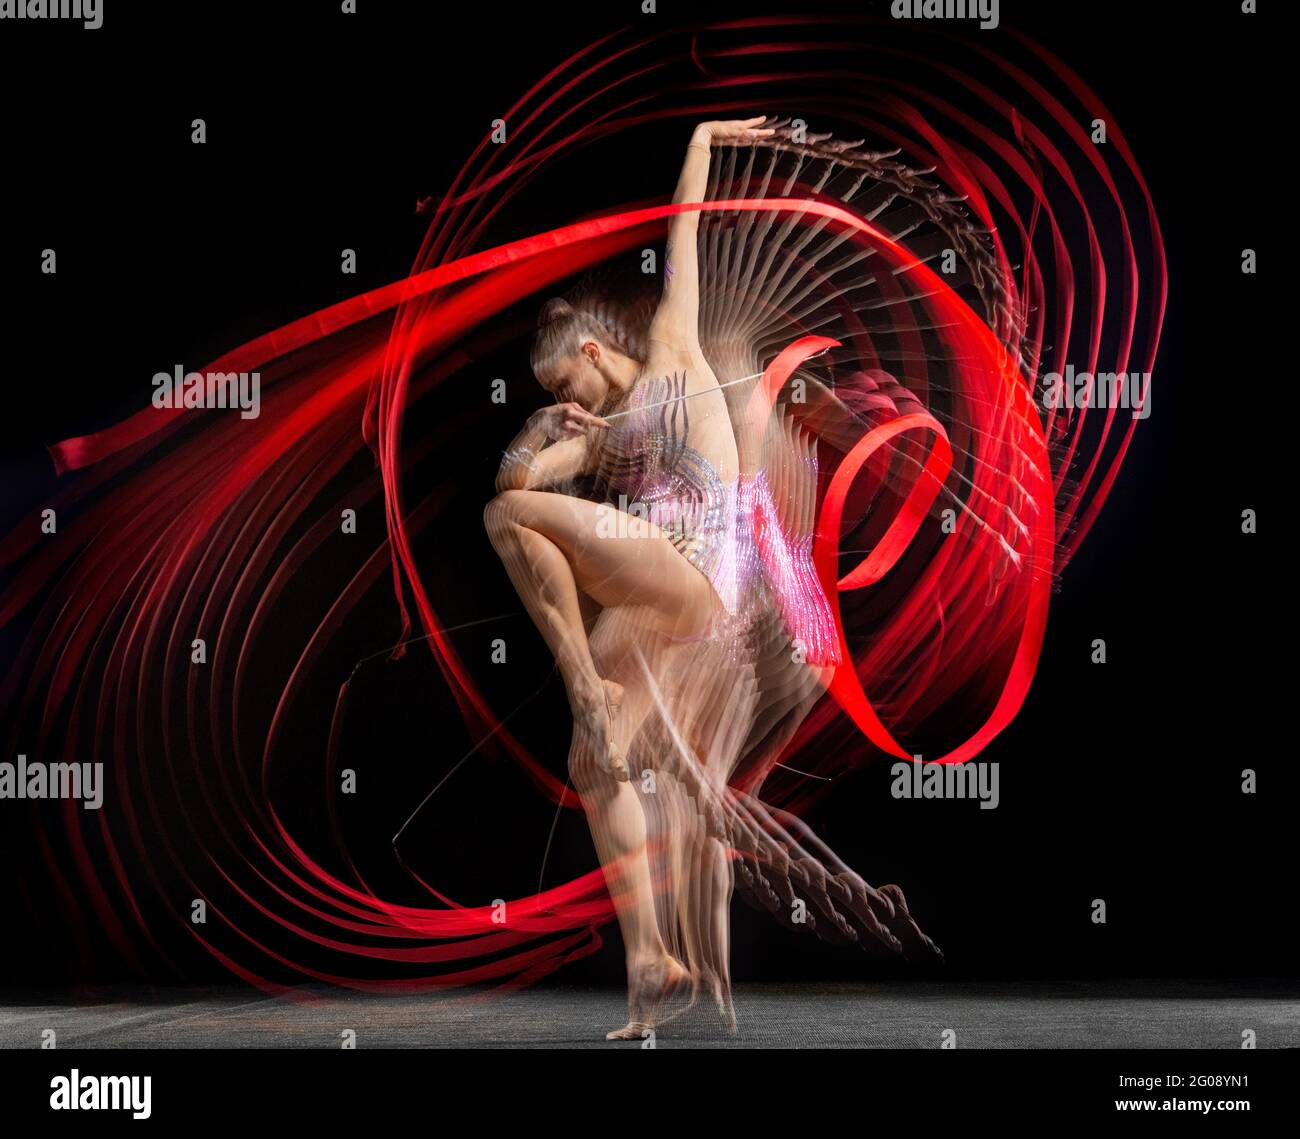 Young graceful girl rhythmic gymnast in motion isolated in mixed light on dark background. Stock Photo